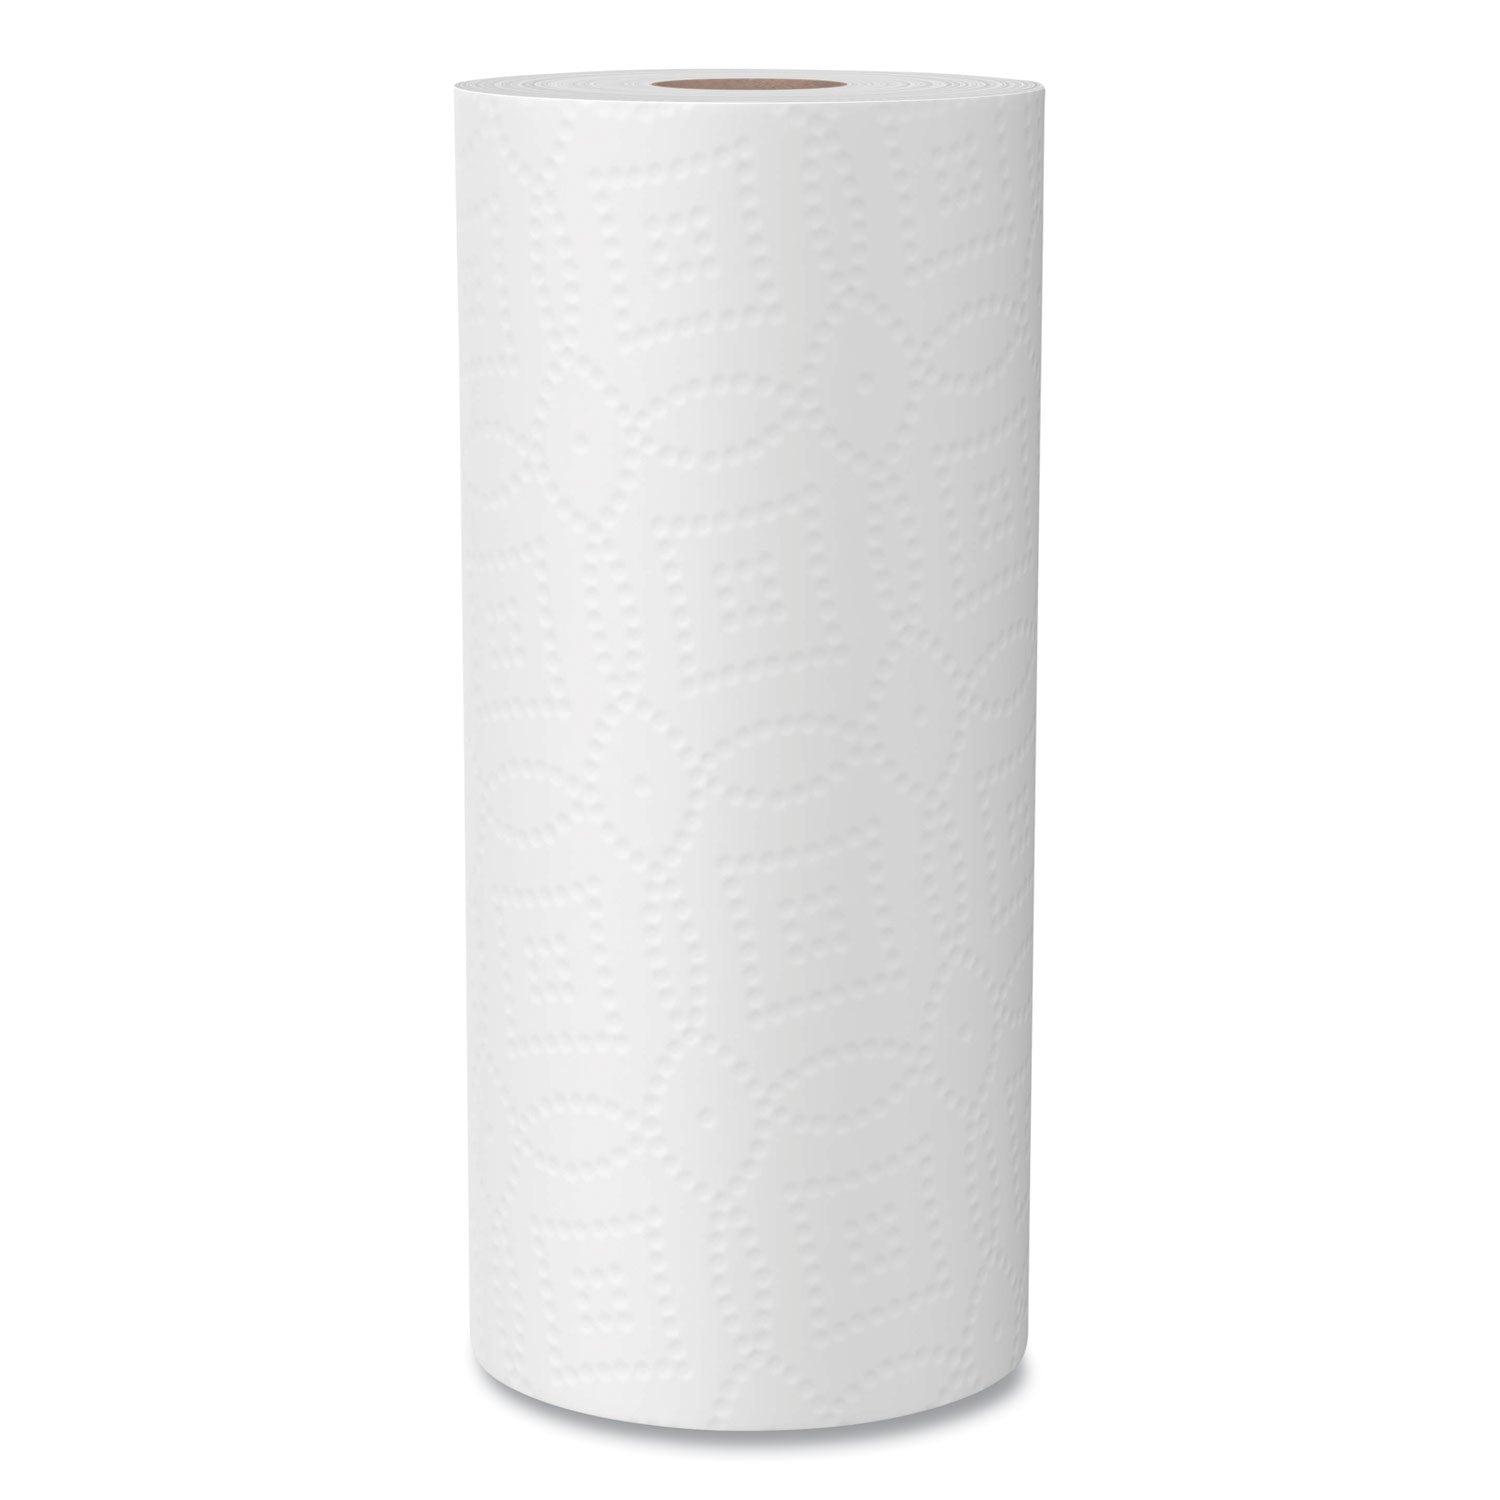 100% Recycled Paper Kitchen Towel Rolls, 2-Ply, 11 x 5.4, 156 Sheets/Rolls, 32 Rolls/Carton - 